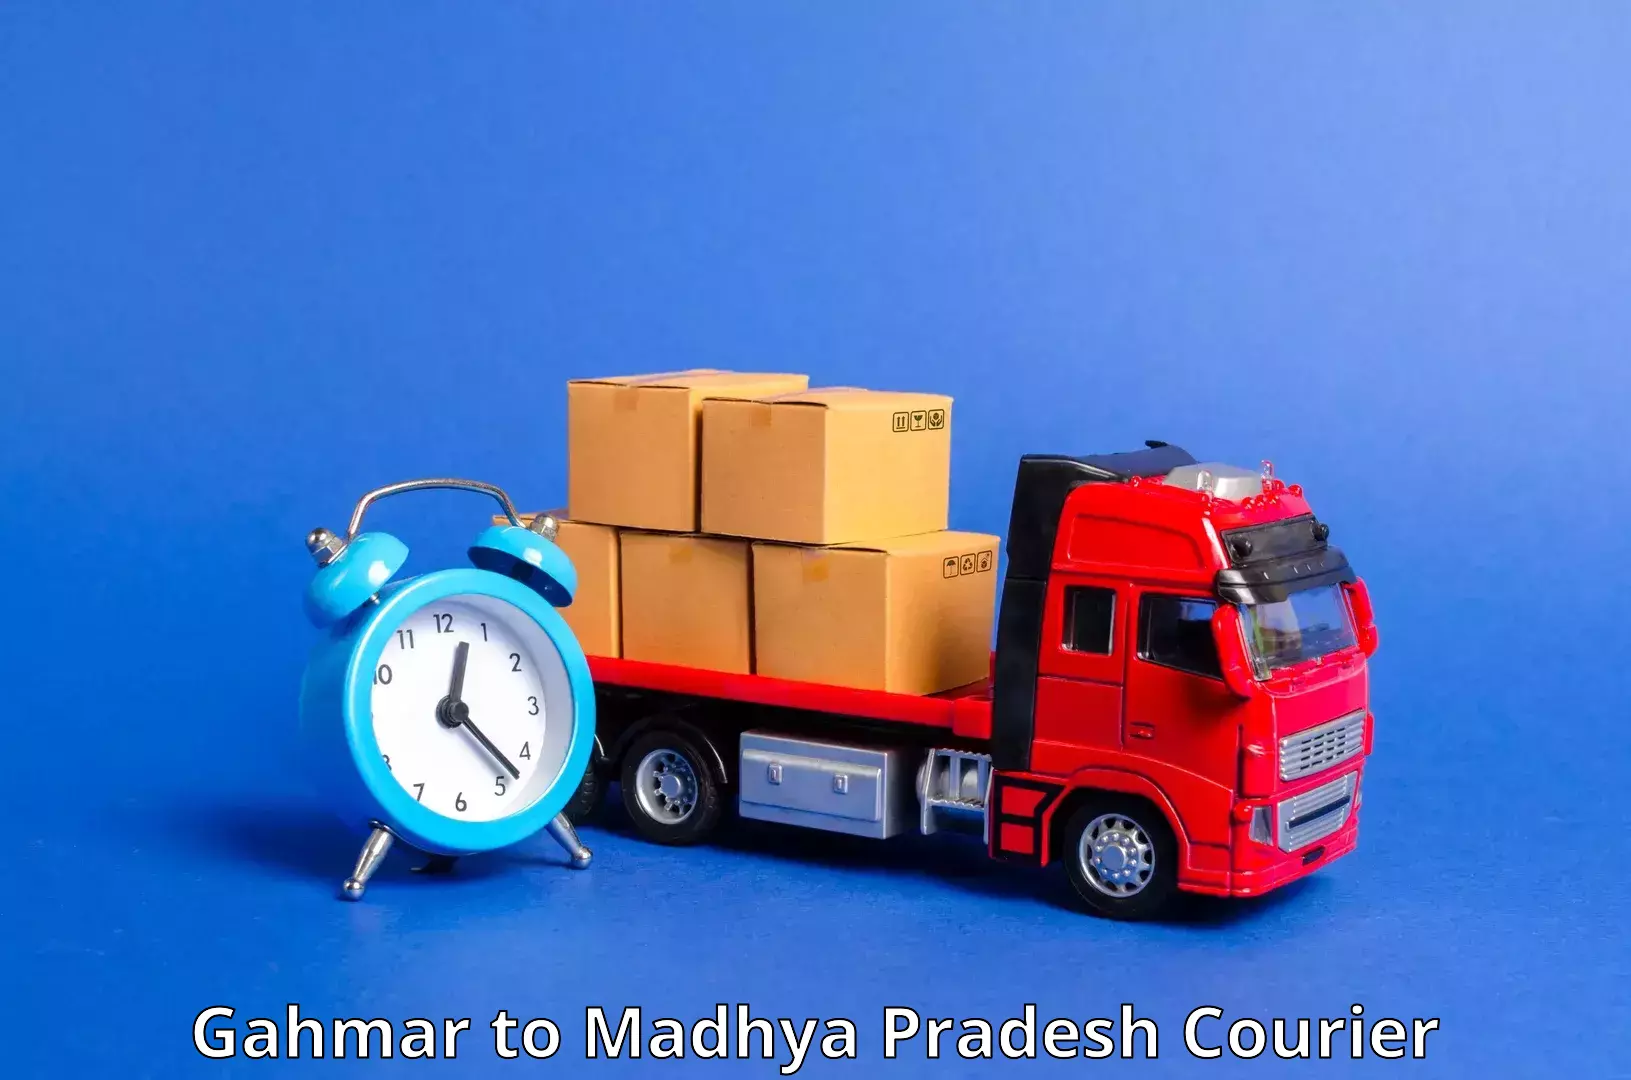 On-call courier service Gahmar to Indore